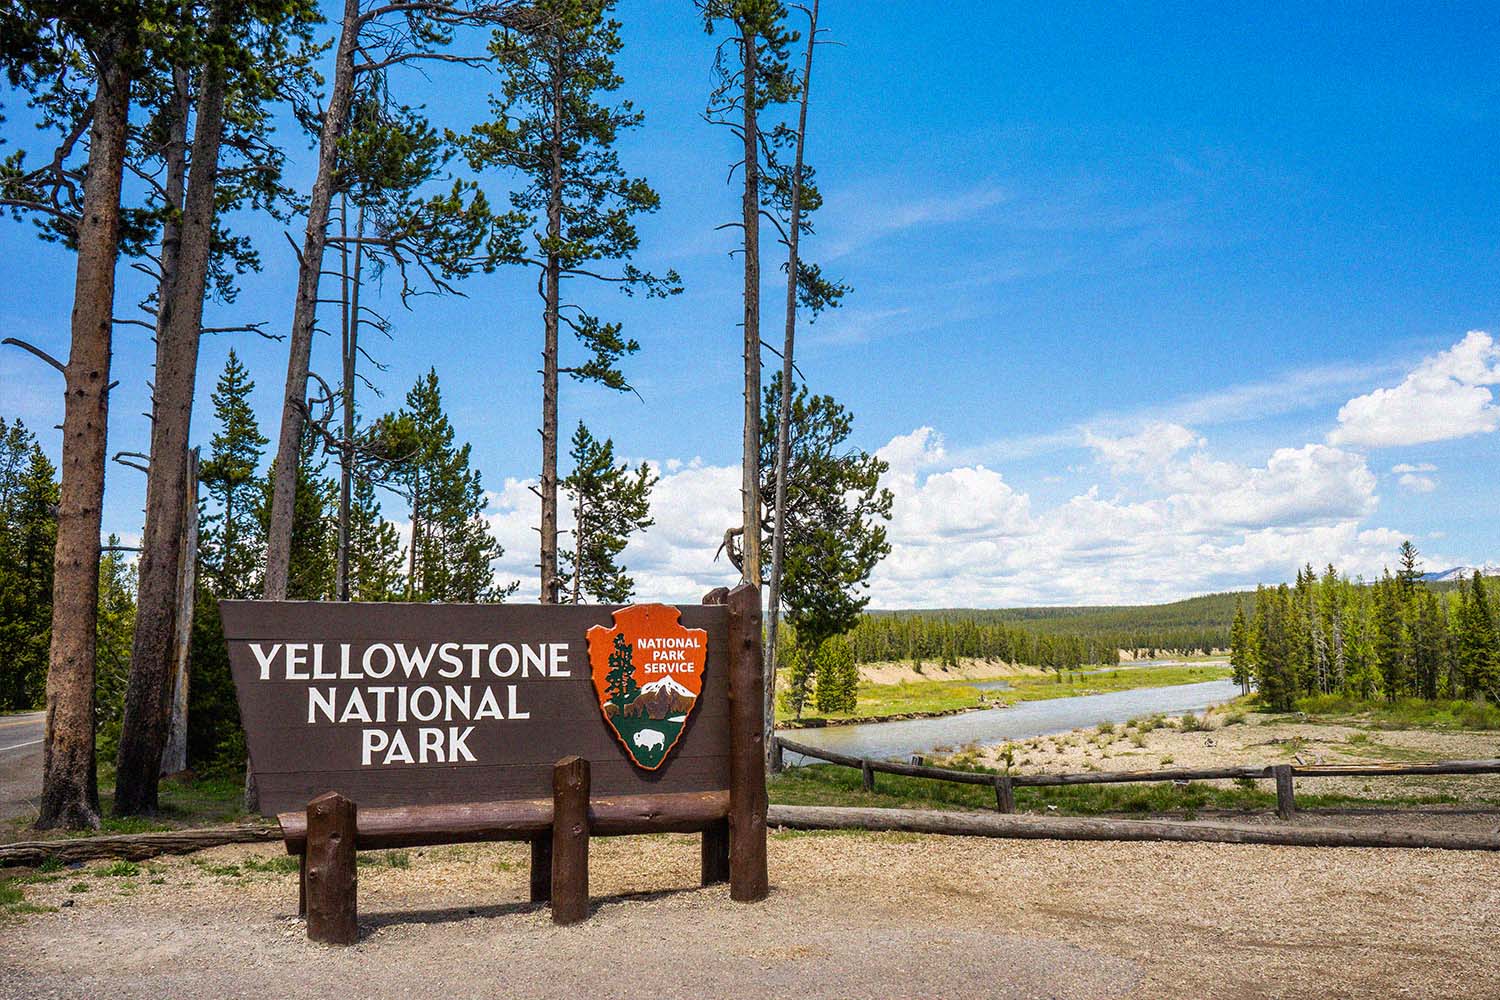 Yellowstone National Park south entrance